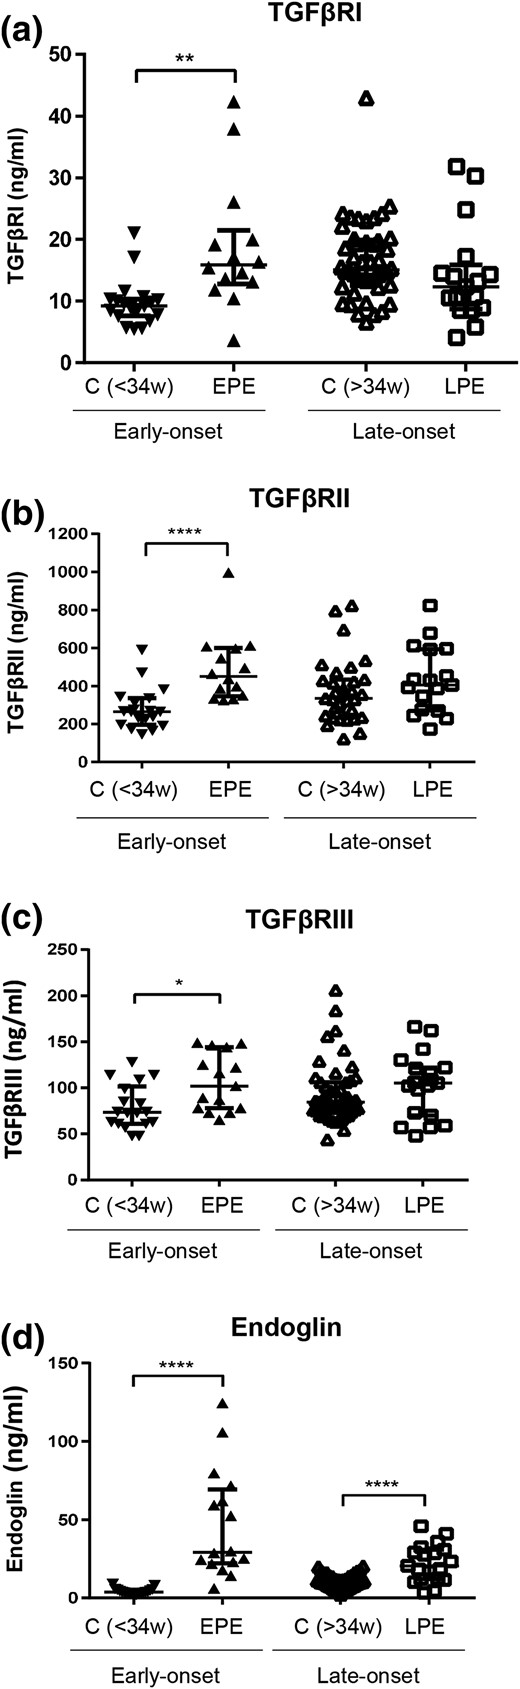 Serum levels of TGF-β receptors in preeclamptic pregnancy at disease presentation. Enzyme-linked immunosorbent assay was used to determine the levels of TGF-β receptors in the sera of early-onset PE (EPE; 28 to 34 weeks of gestation, n = 14) vs gestational age-matched controls (C<34w; n = 19), and late-onset PE (LPE; >34 weeks of gestation, n = 17) vs gestational age-matched controls (C>34w; n = 31). These samples were distinct from those shown in Fig. 1. (a) TGFβRI, (b) TGFβRII, (c) TGFβRIII, and (d) Endoglin. Data are expressed as median ± interquartile range. *P < 0.05, ** P < 0.01, and ****P < 0.0001.